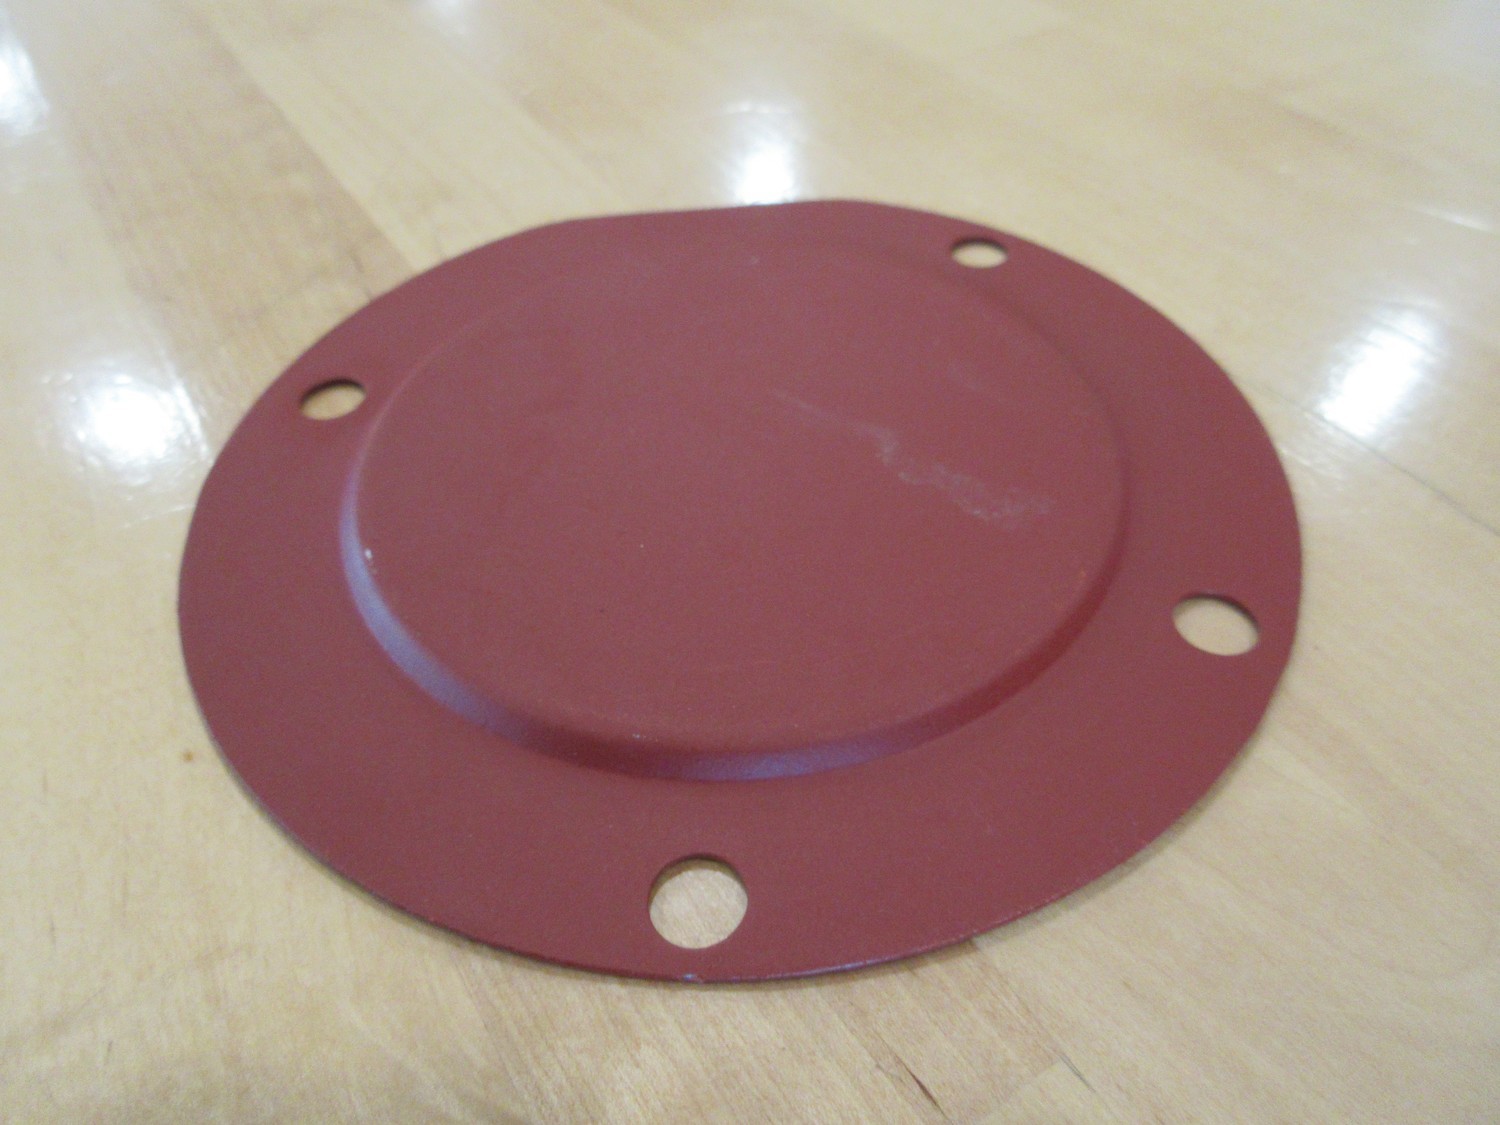 Master Cylinder Inspection Cover Plate